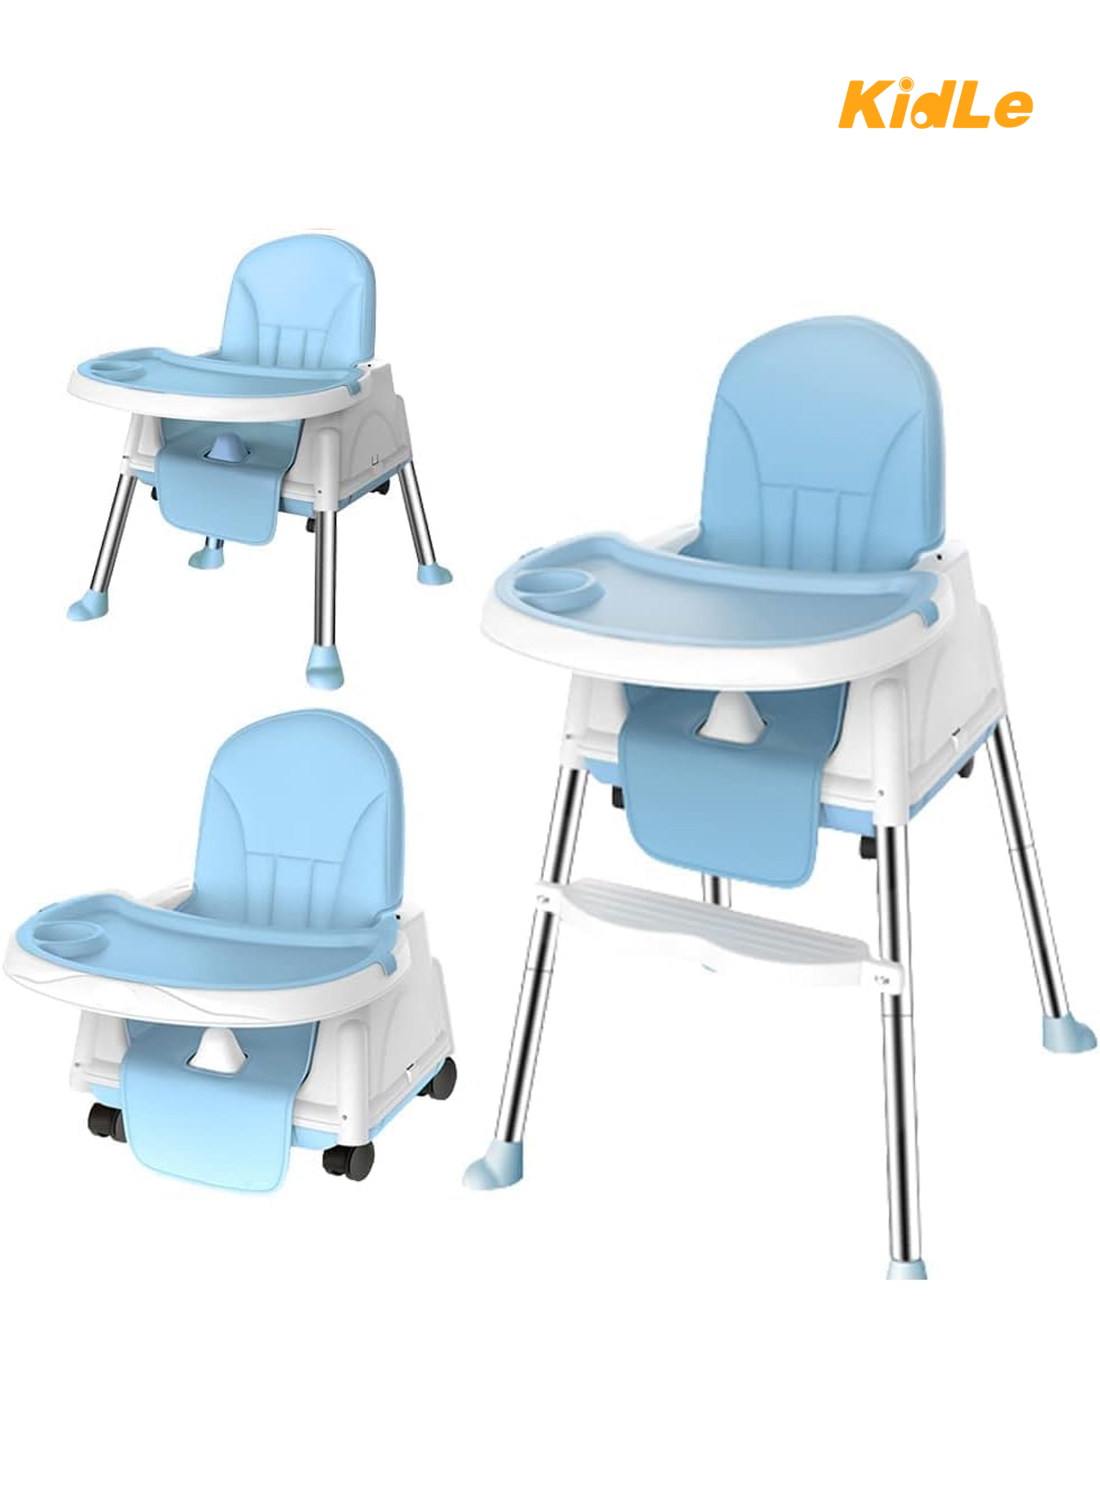 Baby highchair For Eating Foldable Portable Household Multifunctional Portable Baby Dining Car With Roller Wheels